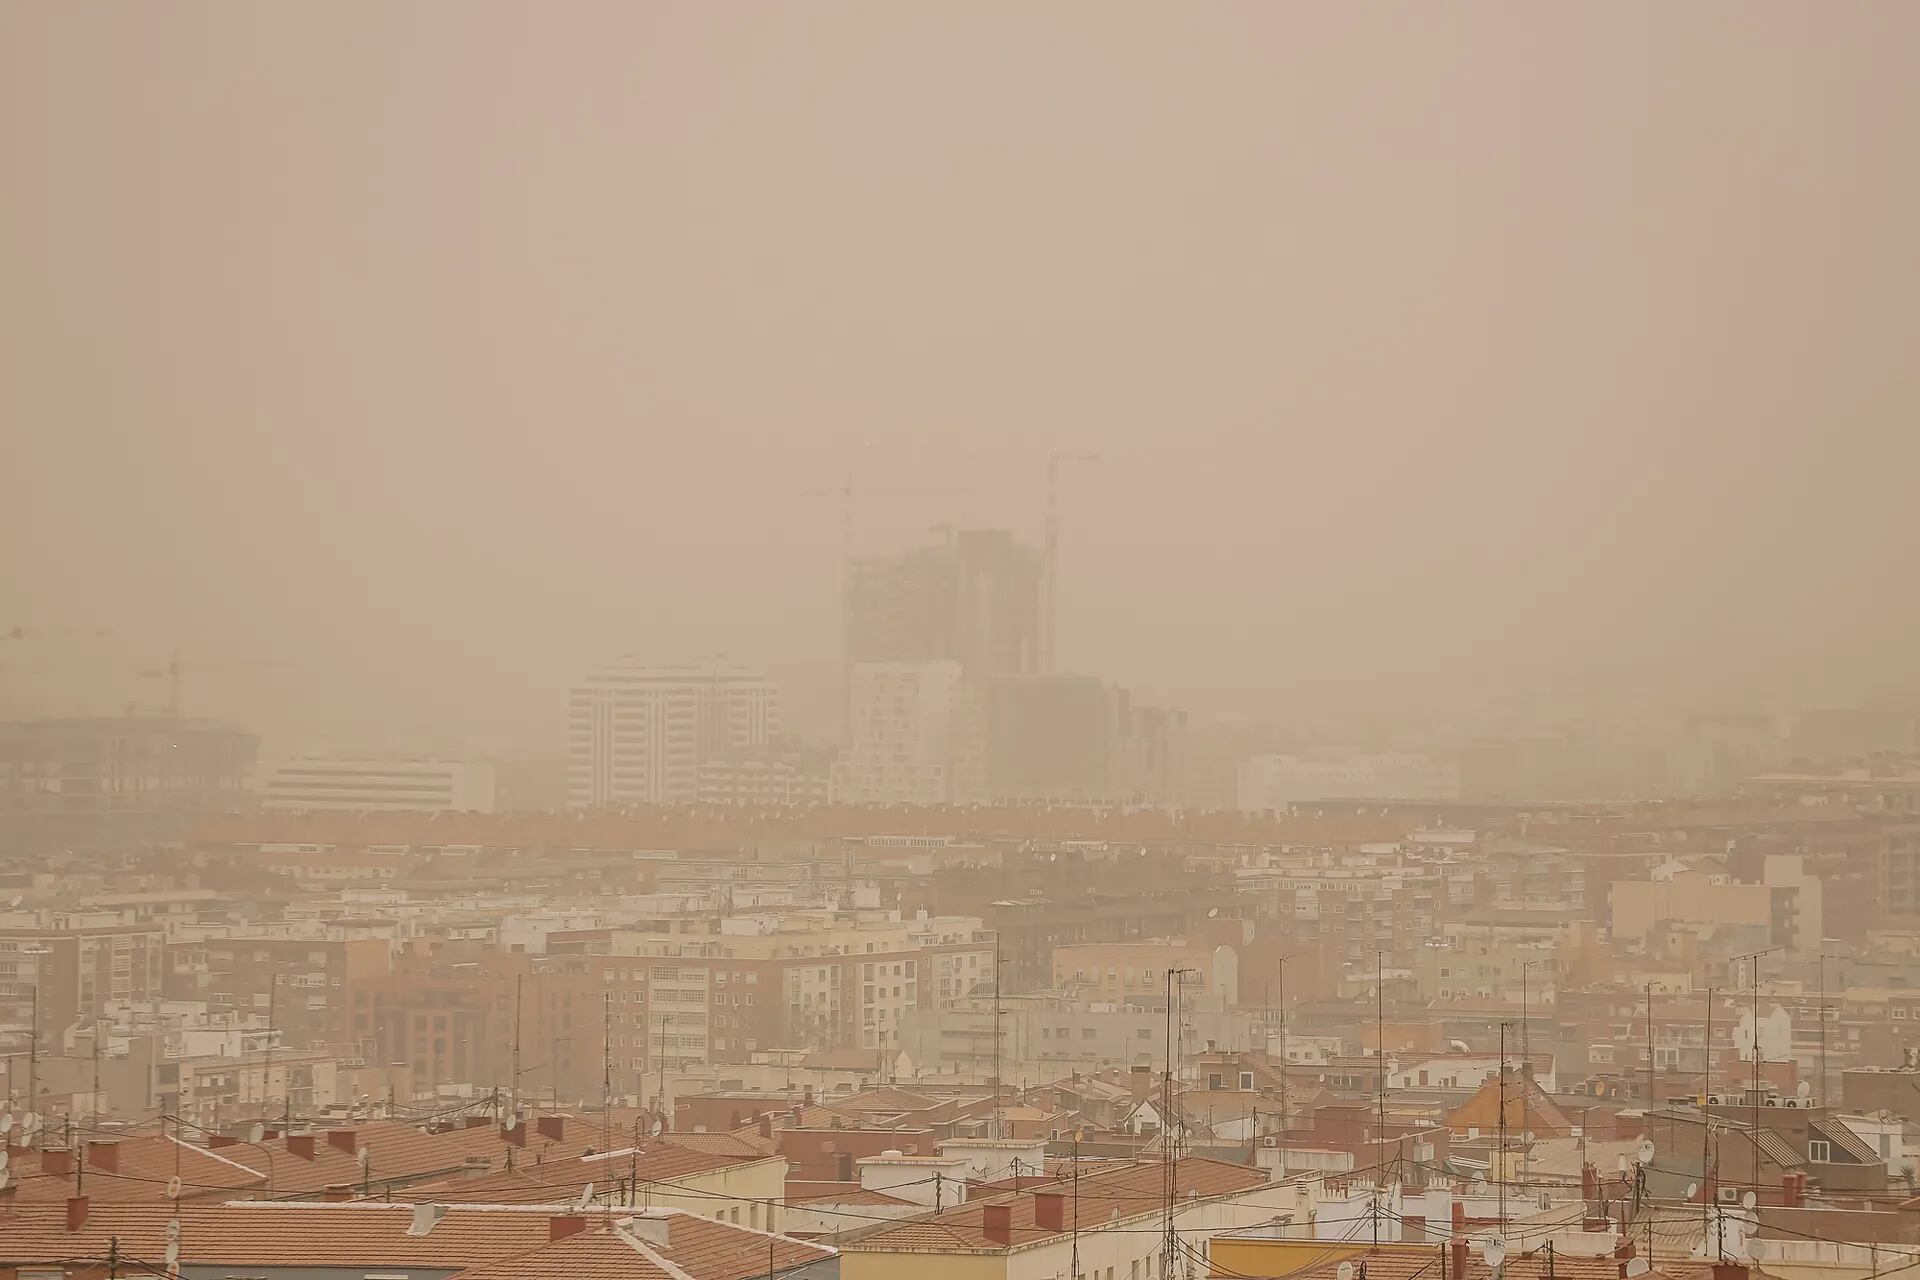 Madrid is surrounded by sandstorms